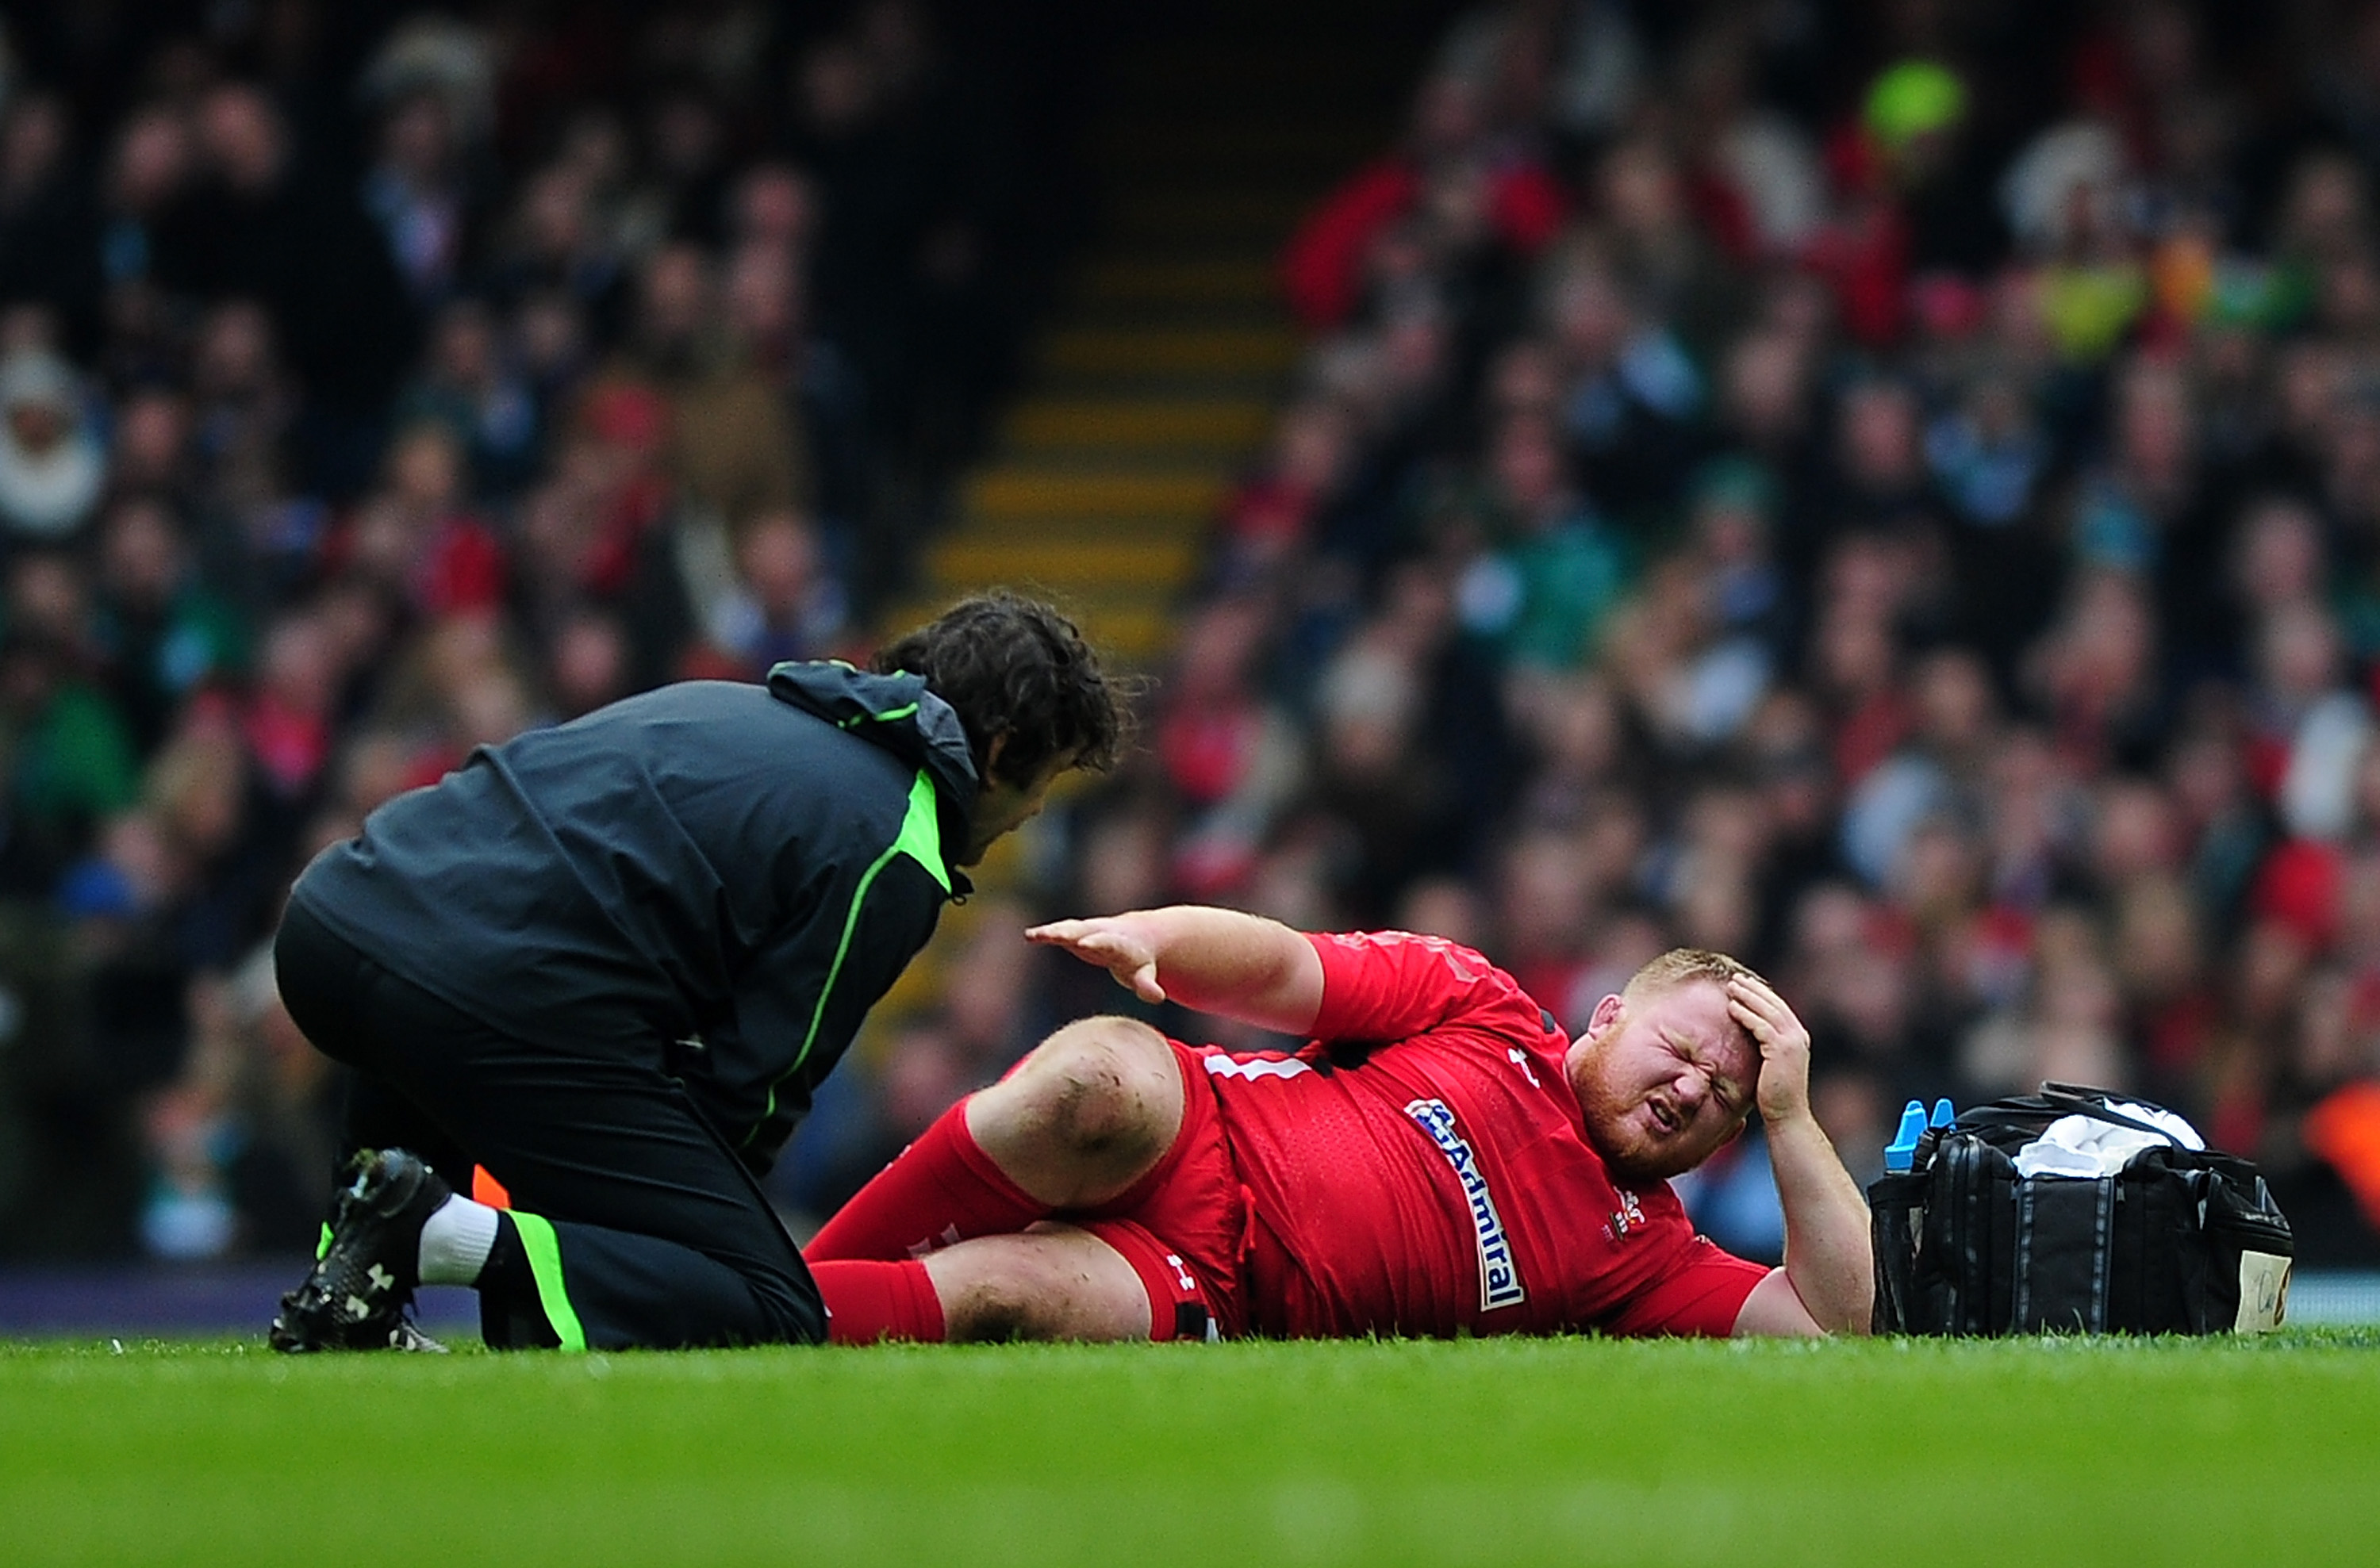 Samson Lee is treated for a leg injury